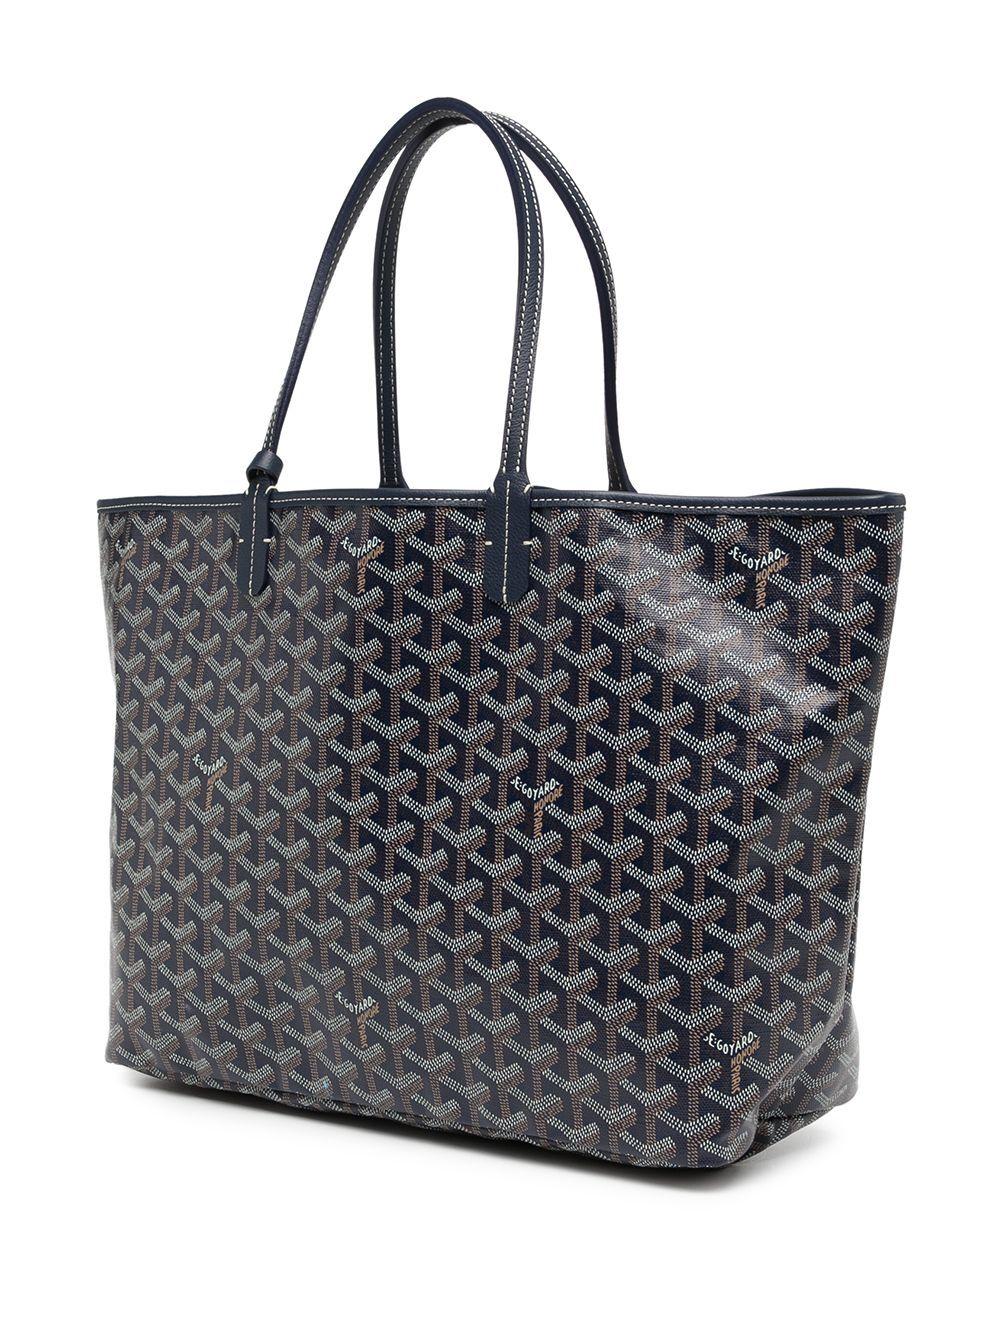 A handbag to truly set your heart aflutter, this customised Goyard St Louis tote bag derives from Rewind's Emotional Baggage collection. Its blue monogram leather is vitalised by a flurry of hand-painted butterflies, in a mix of refined luxury and